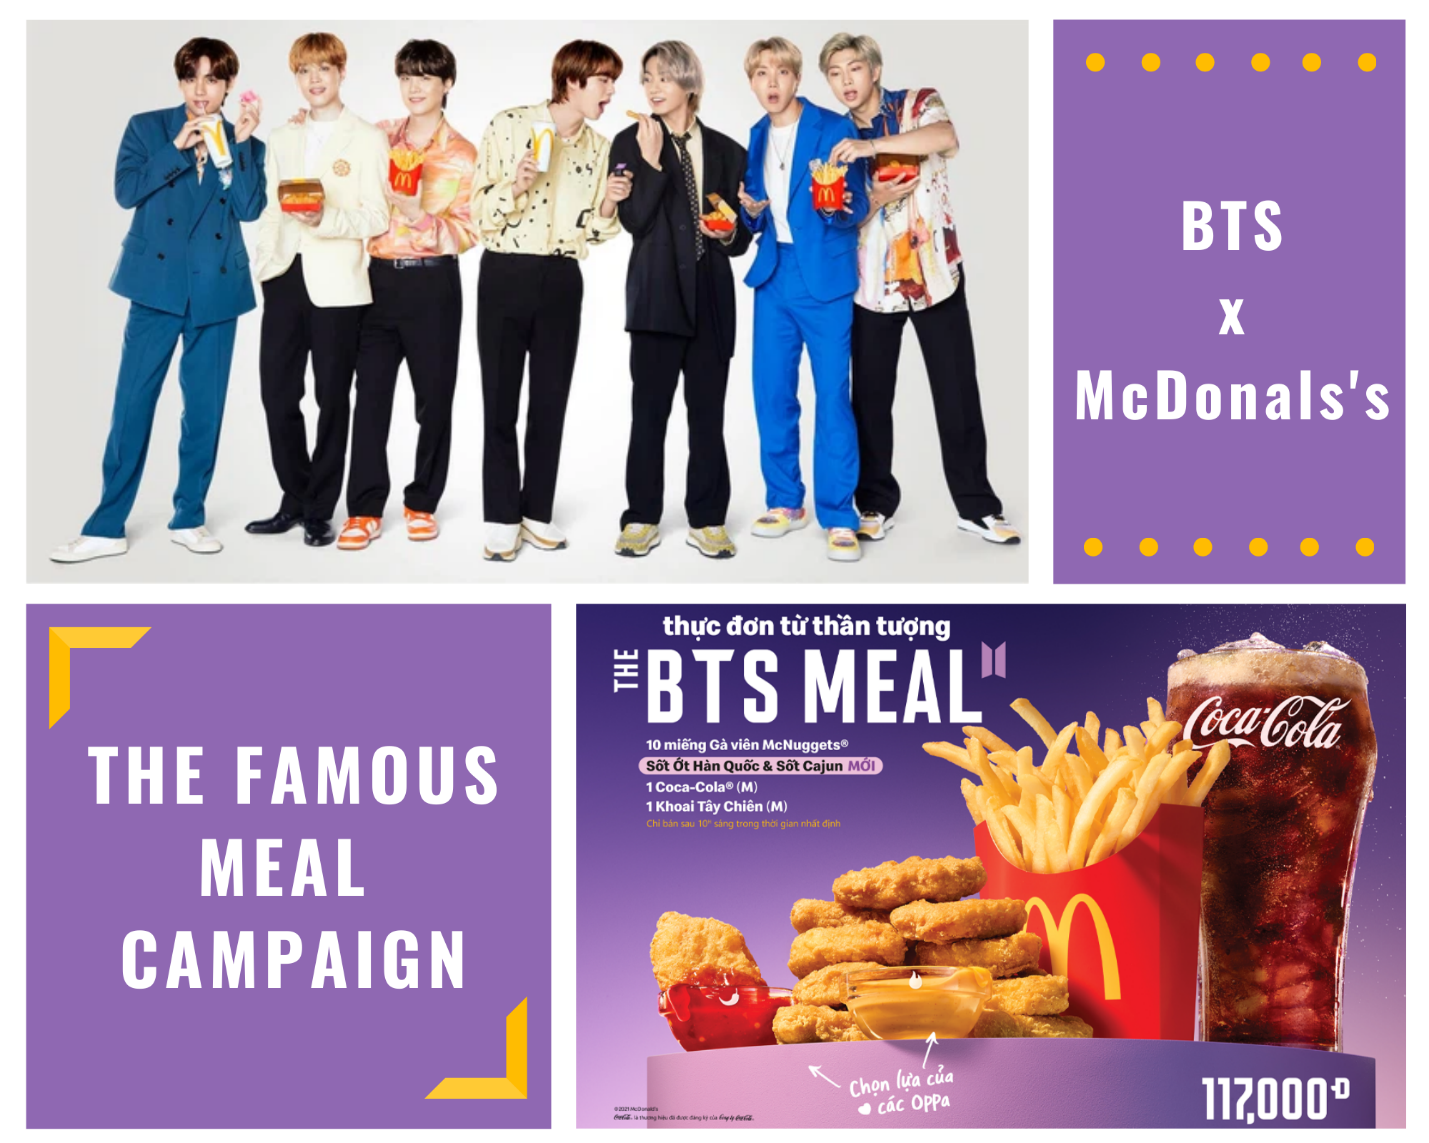 ACTIVATION NEWS | McDonald’s bắt tay cùng BTS gây sốt với “The Famous Meal”